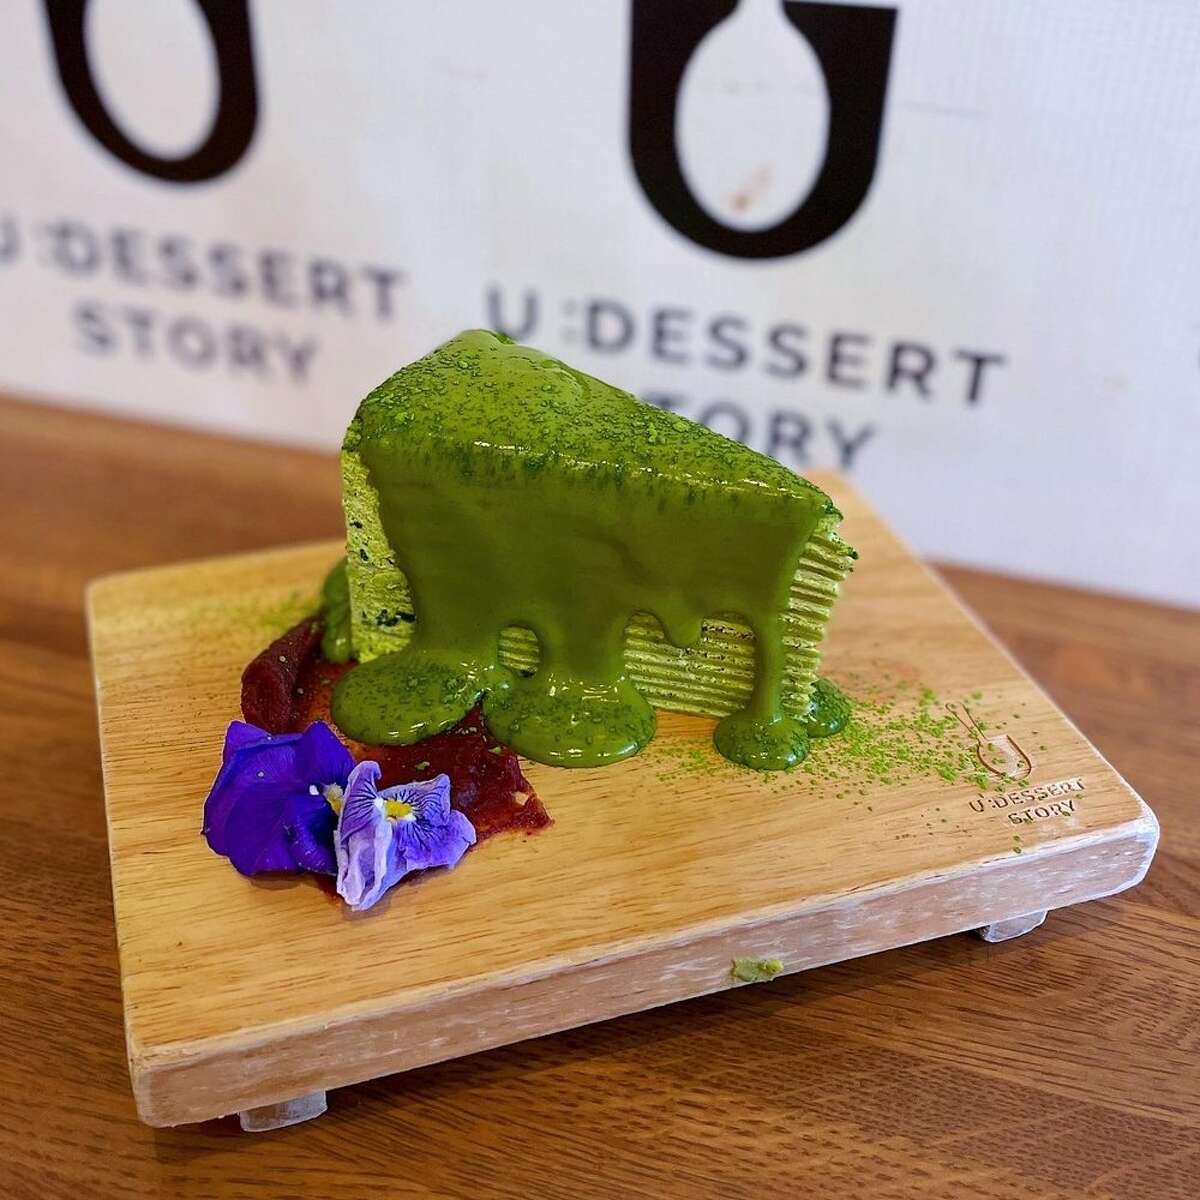 San Francisco's U :Dessert Story gives visitors treats that are so beautifully plated they demand to be photographed before being eaten.